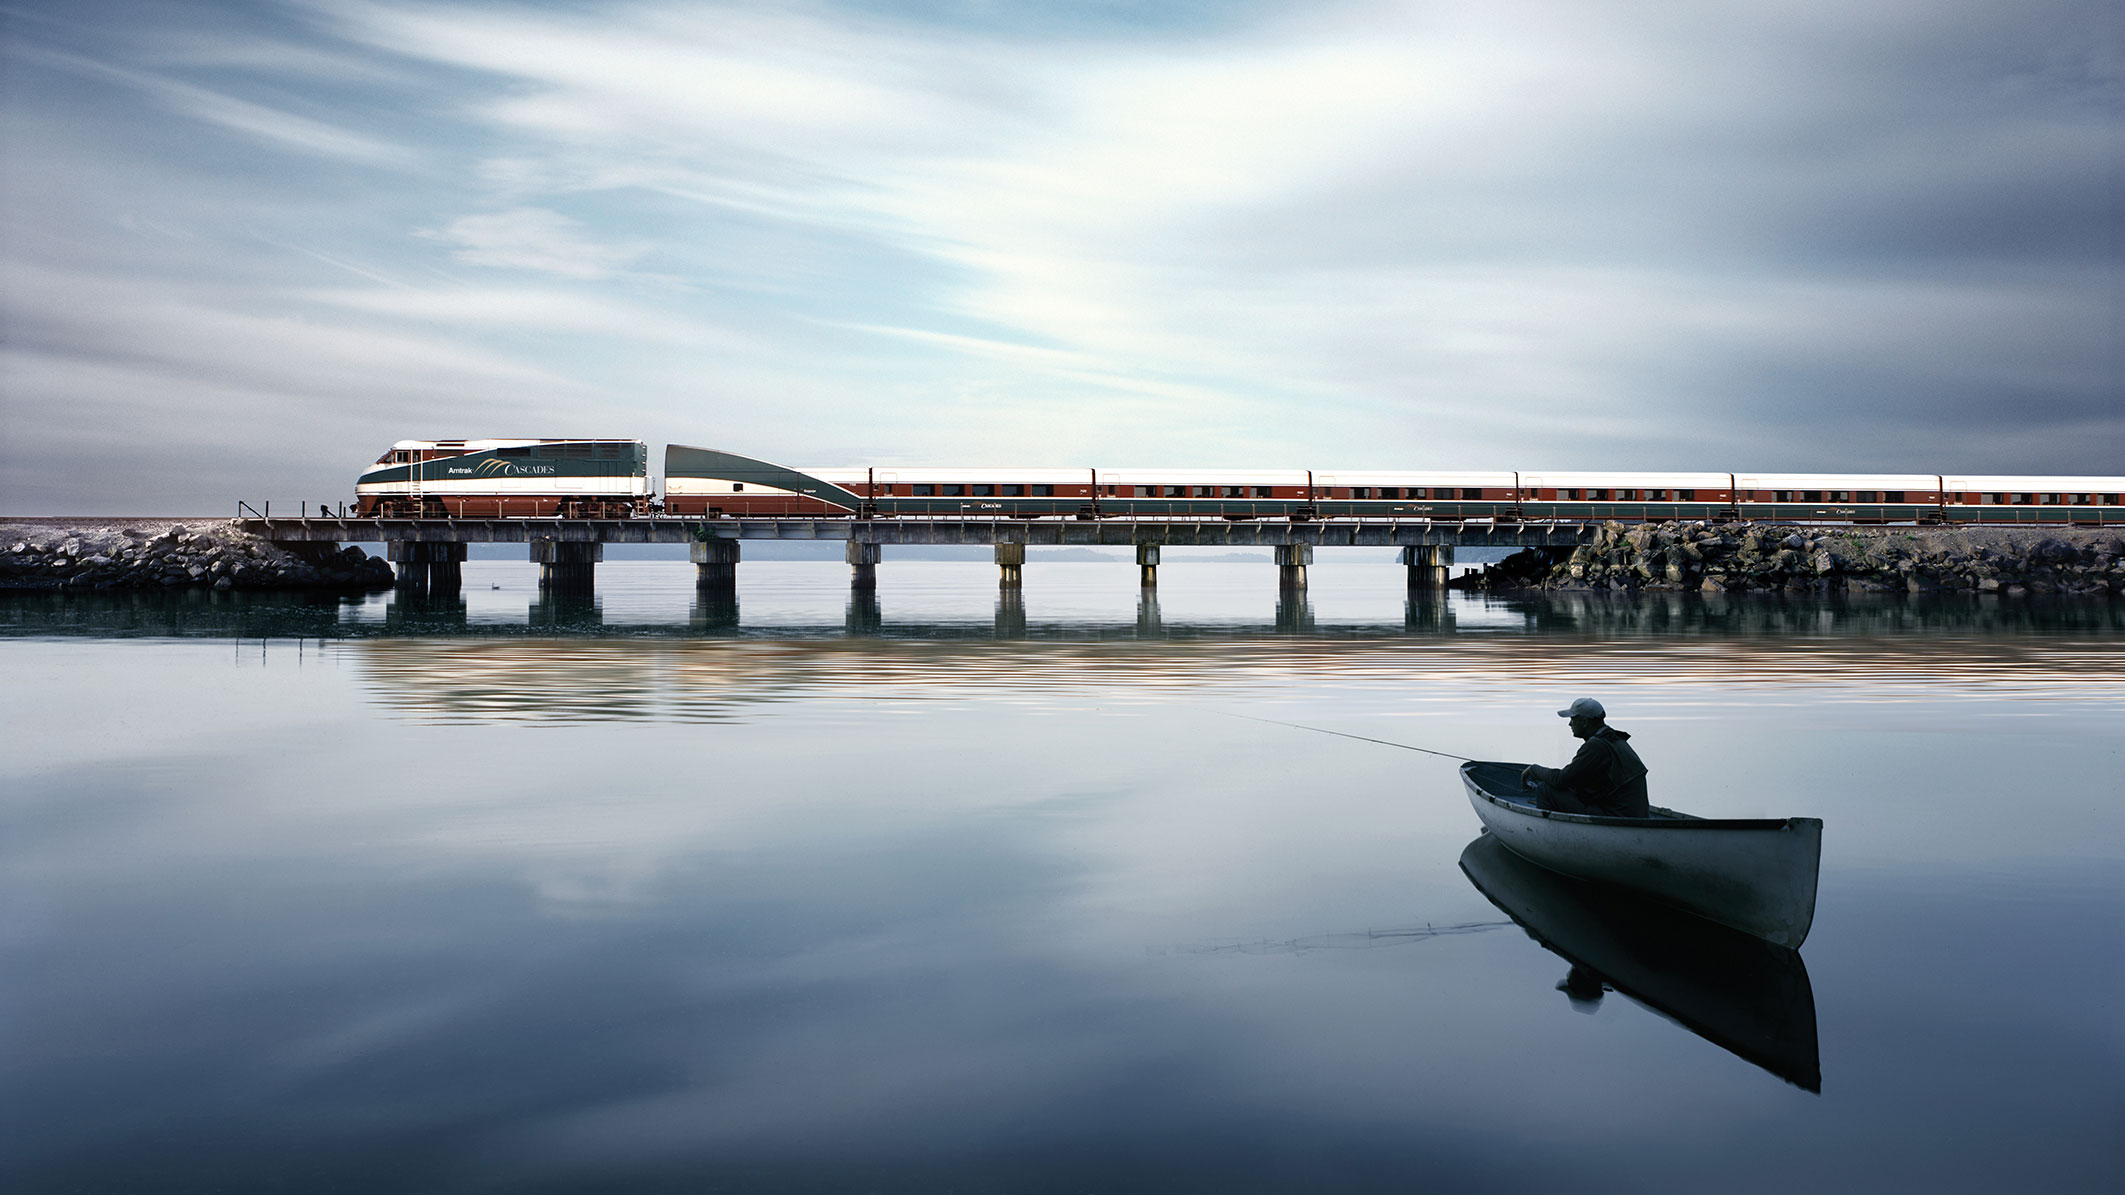 Amtrak Cascades Train Route train over water on a bridge with a man in a boat looking on